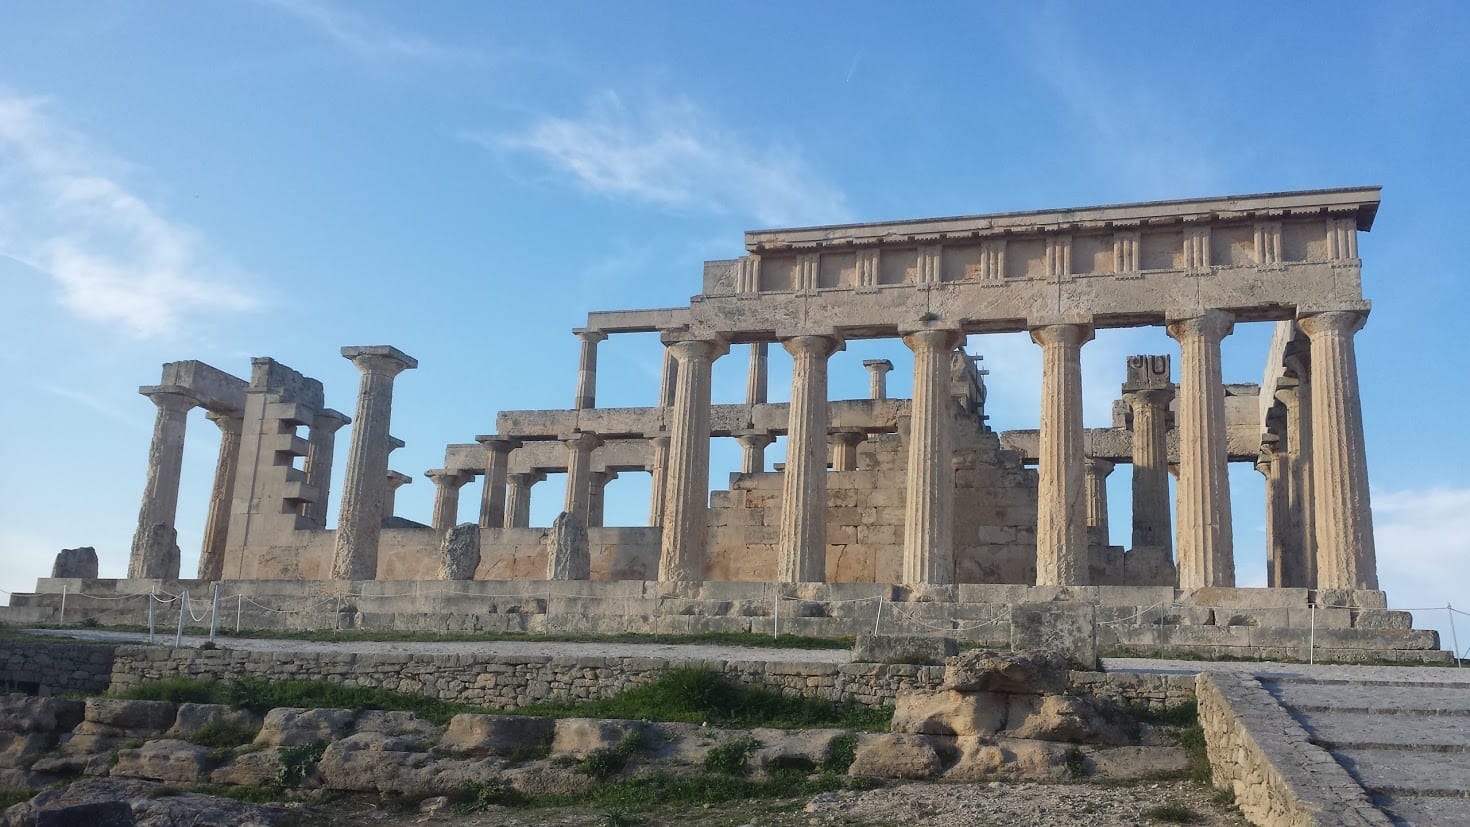 A curious fact about ancient Greece is that the Temple of Aphaia in Aegina island shown here may be part of a sacred triangle with 2 other temples in Greece.